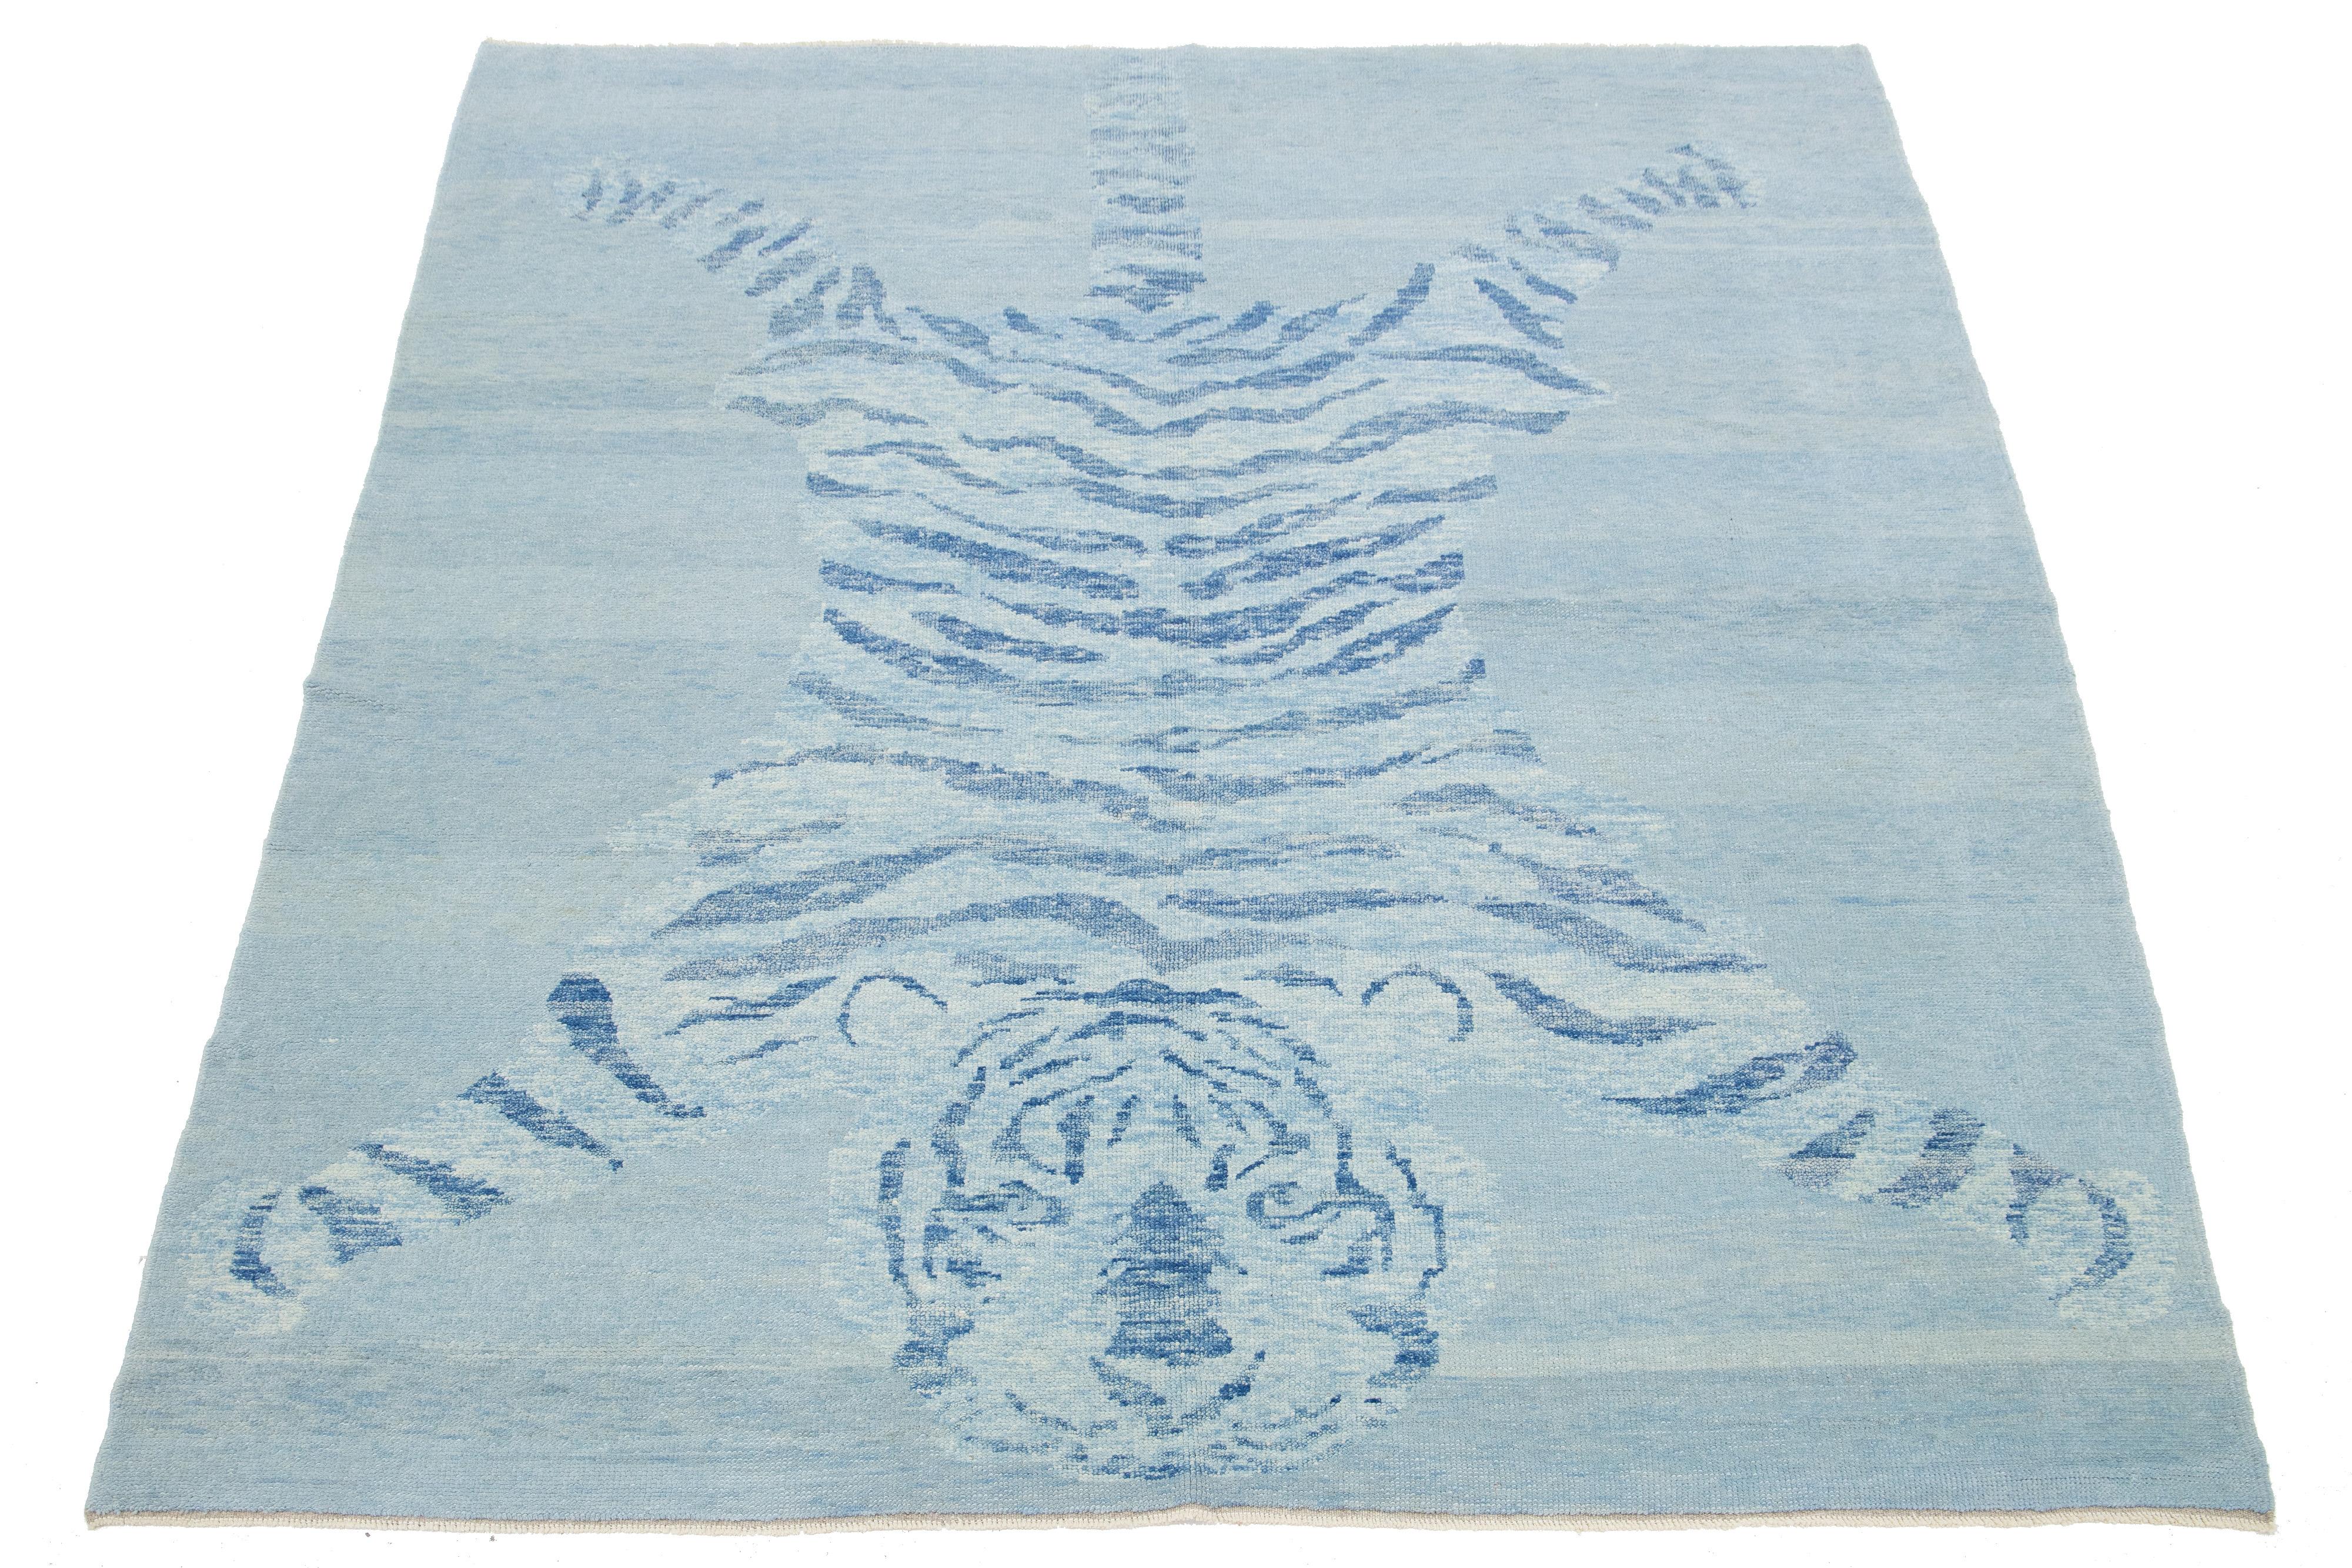 This beautiful Turkish Art Deco wool rug features a blue field with beige accents and a stunning pictorial design of a tiger.

This rug measures 6'3